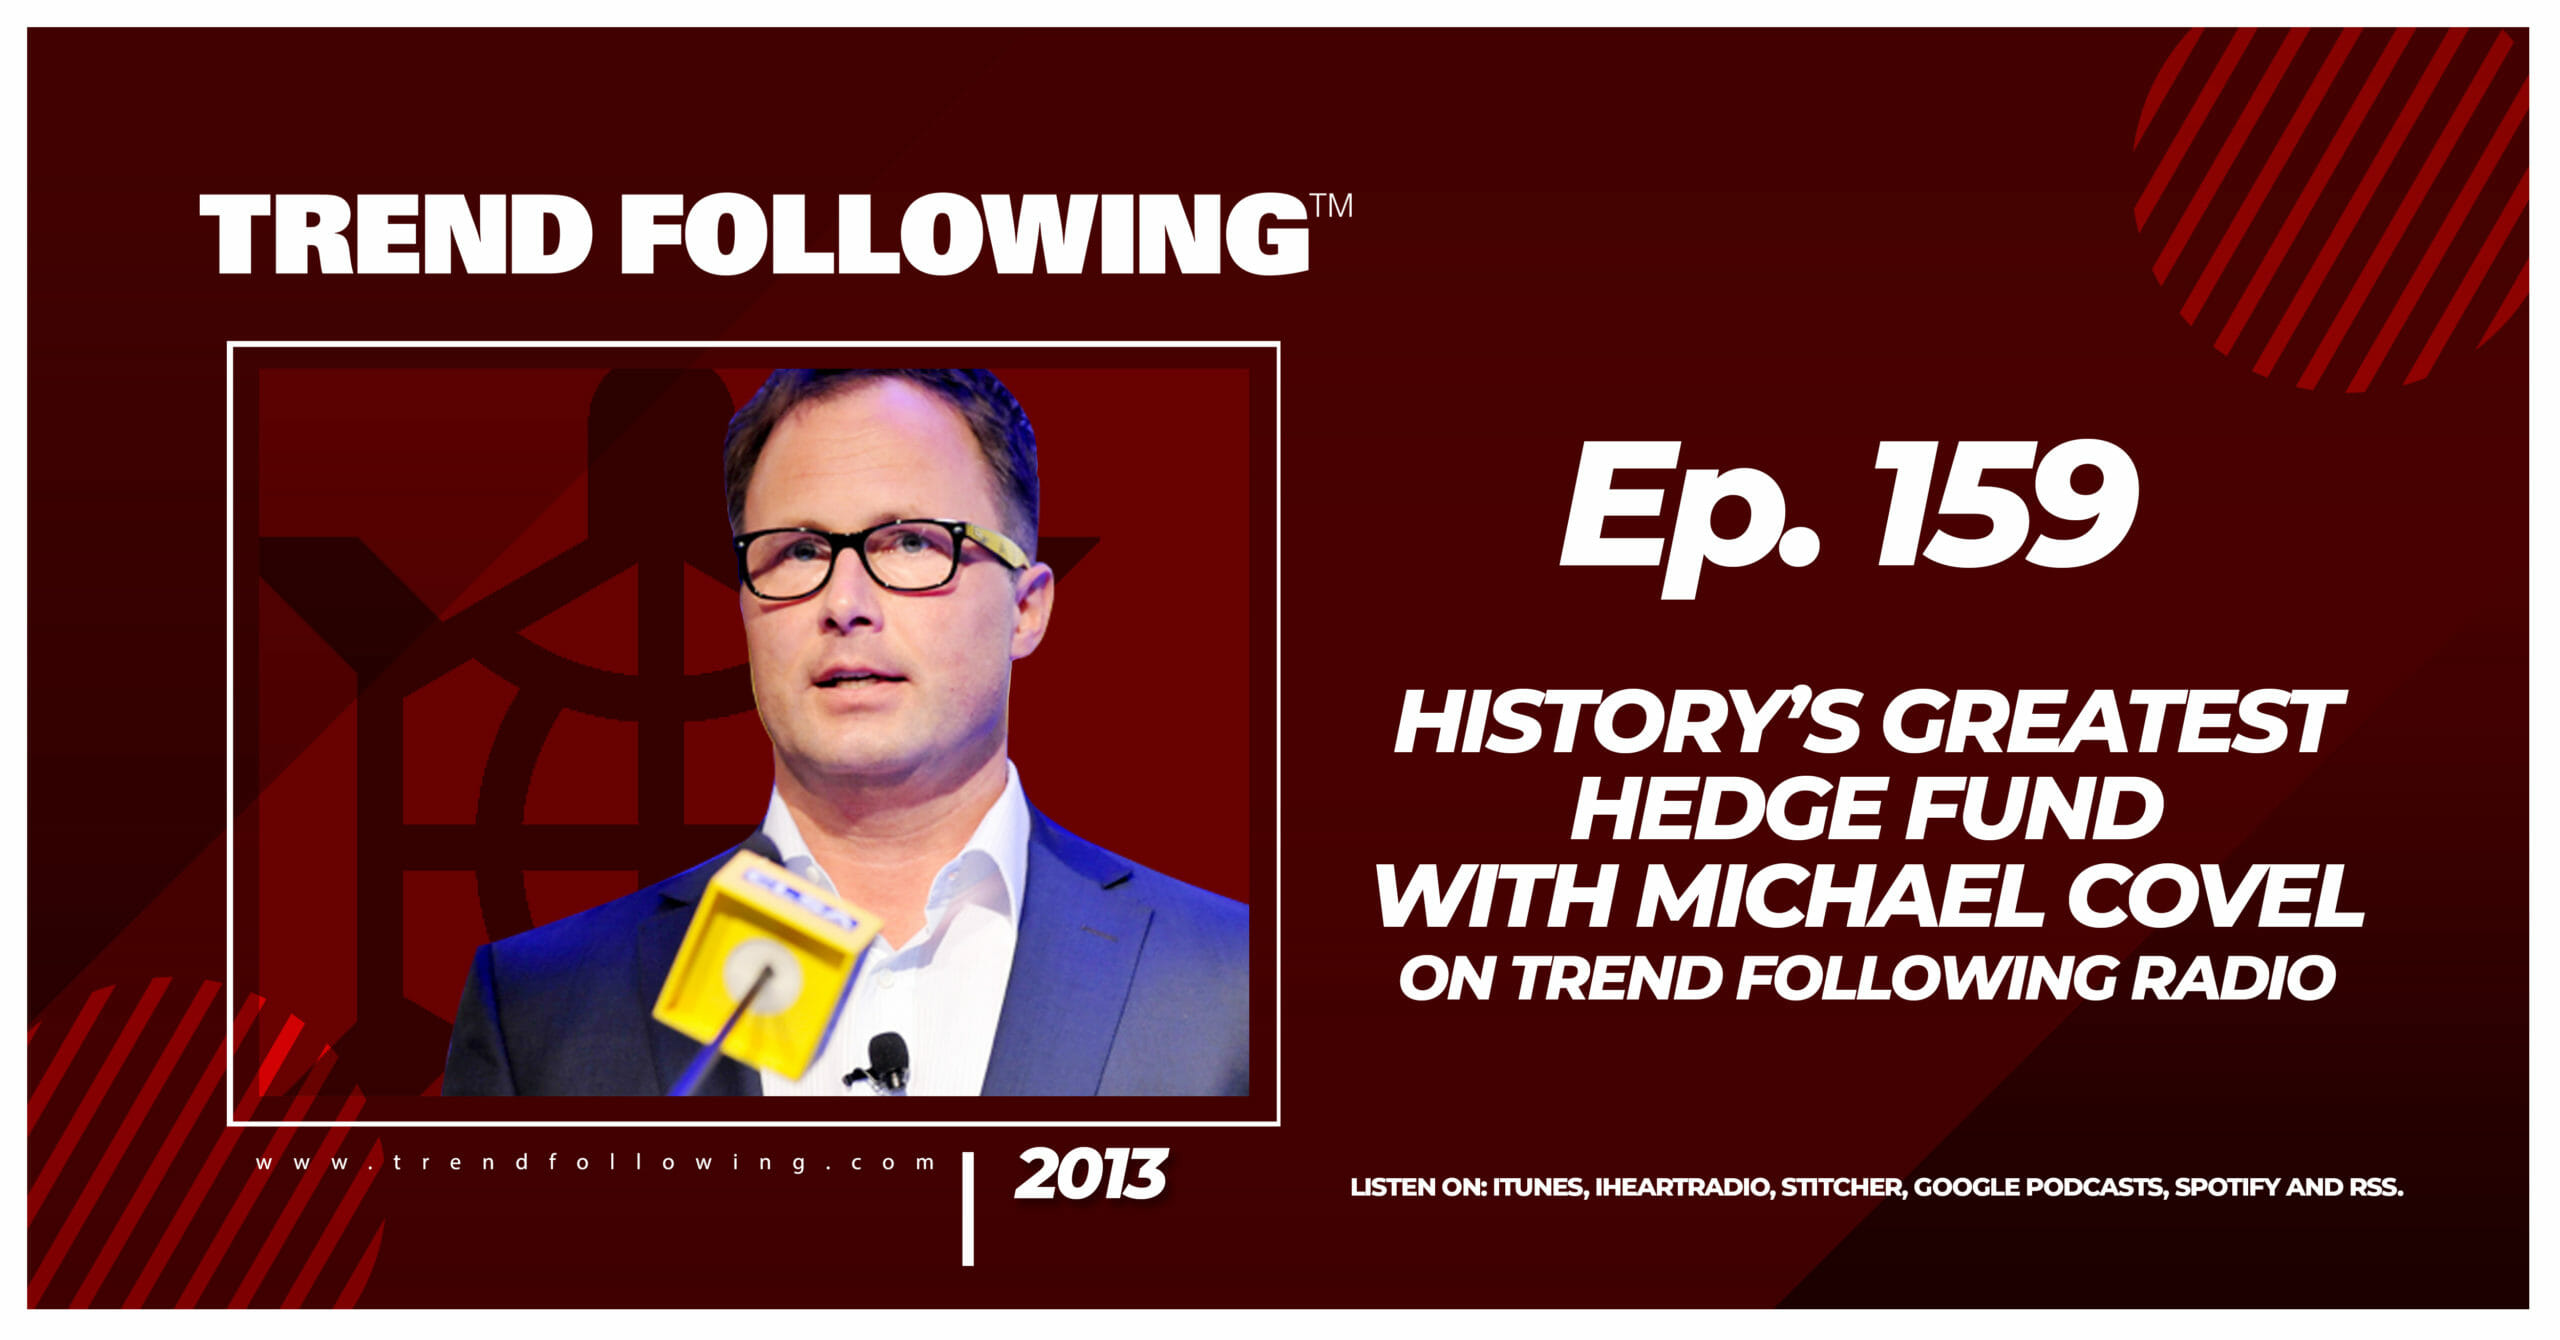 History’s Greatest Hedge Fund with Michael Covel on Trend Following Radio